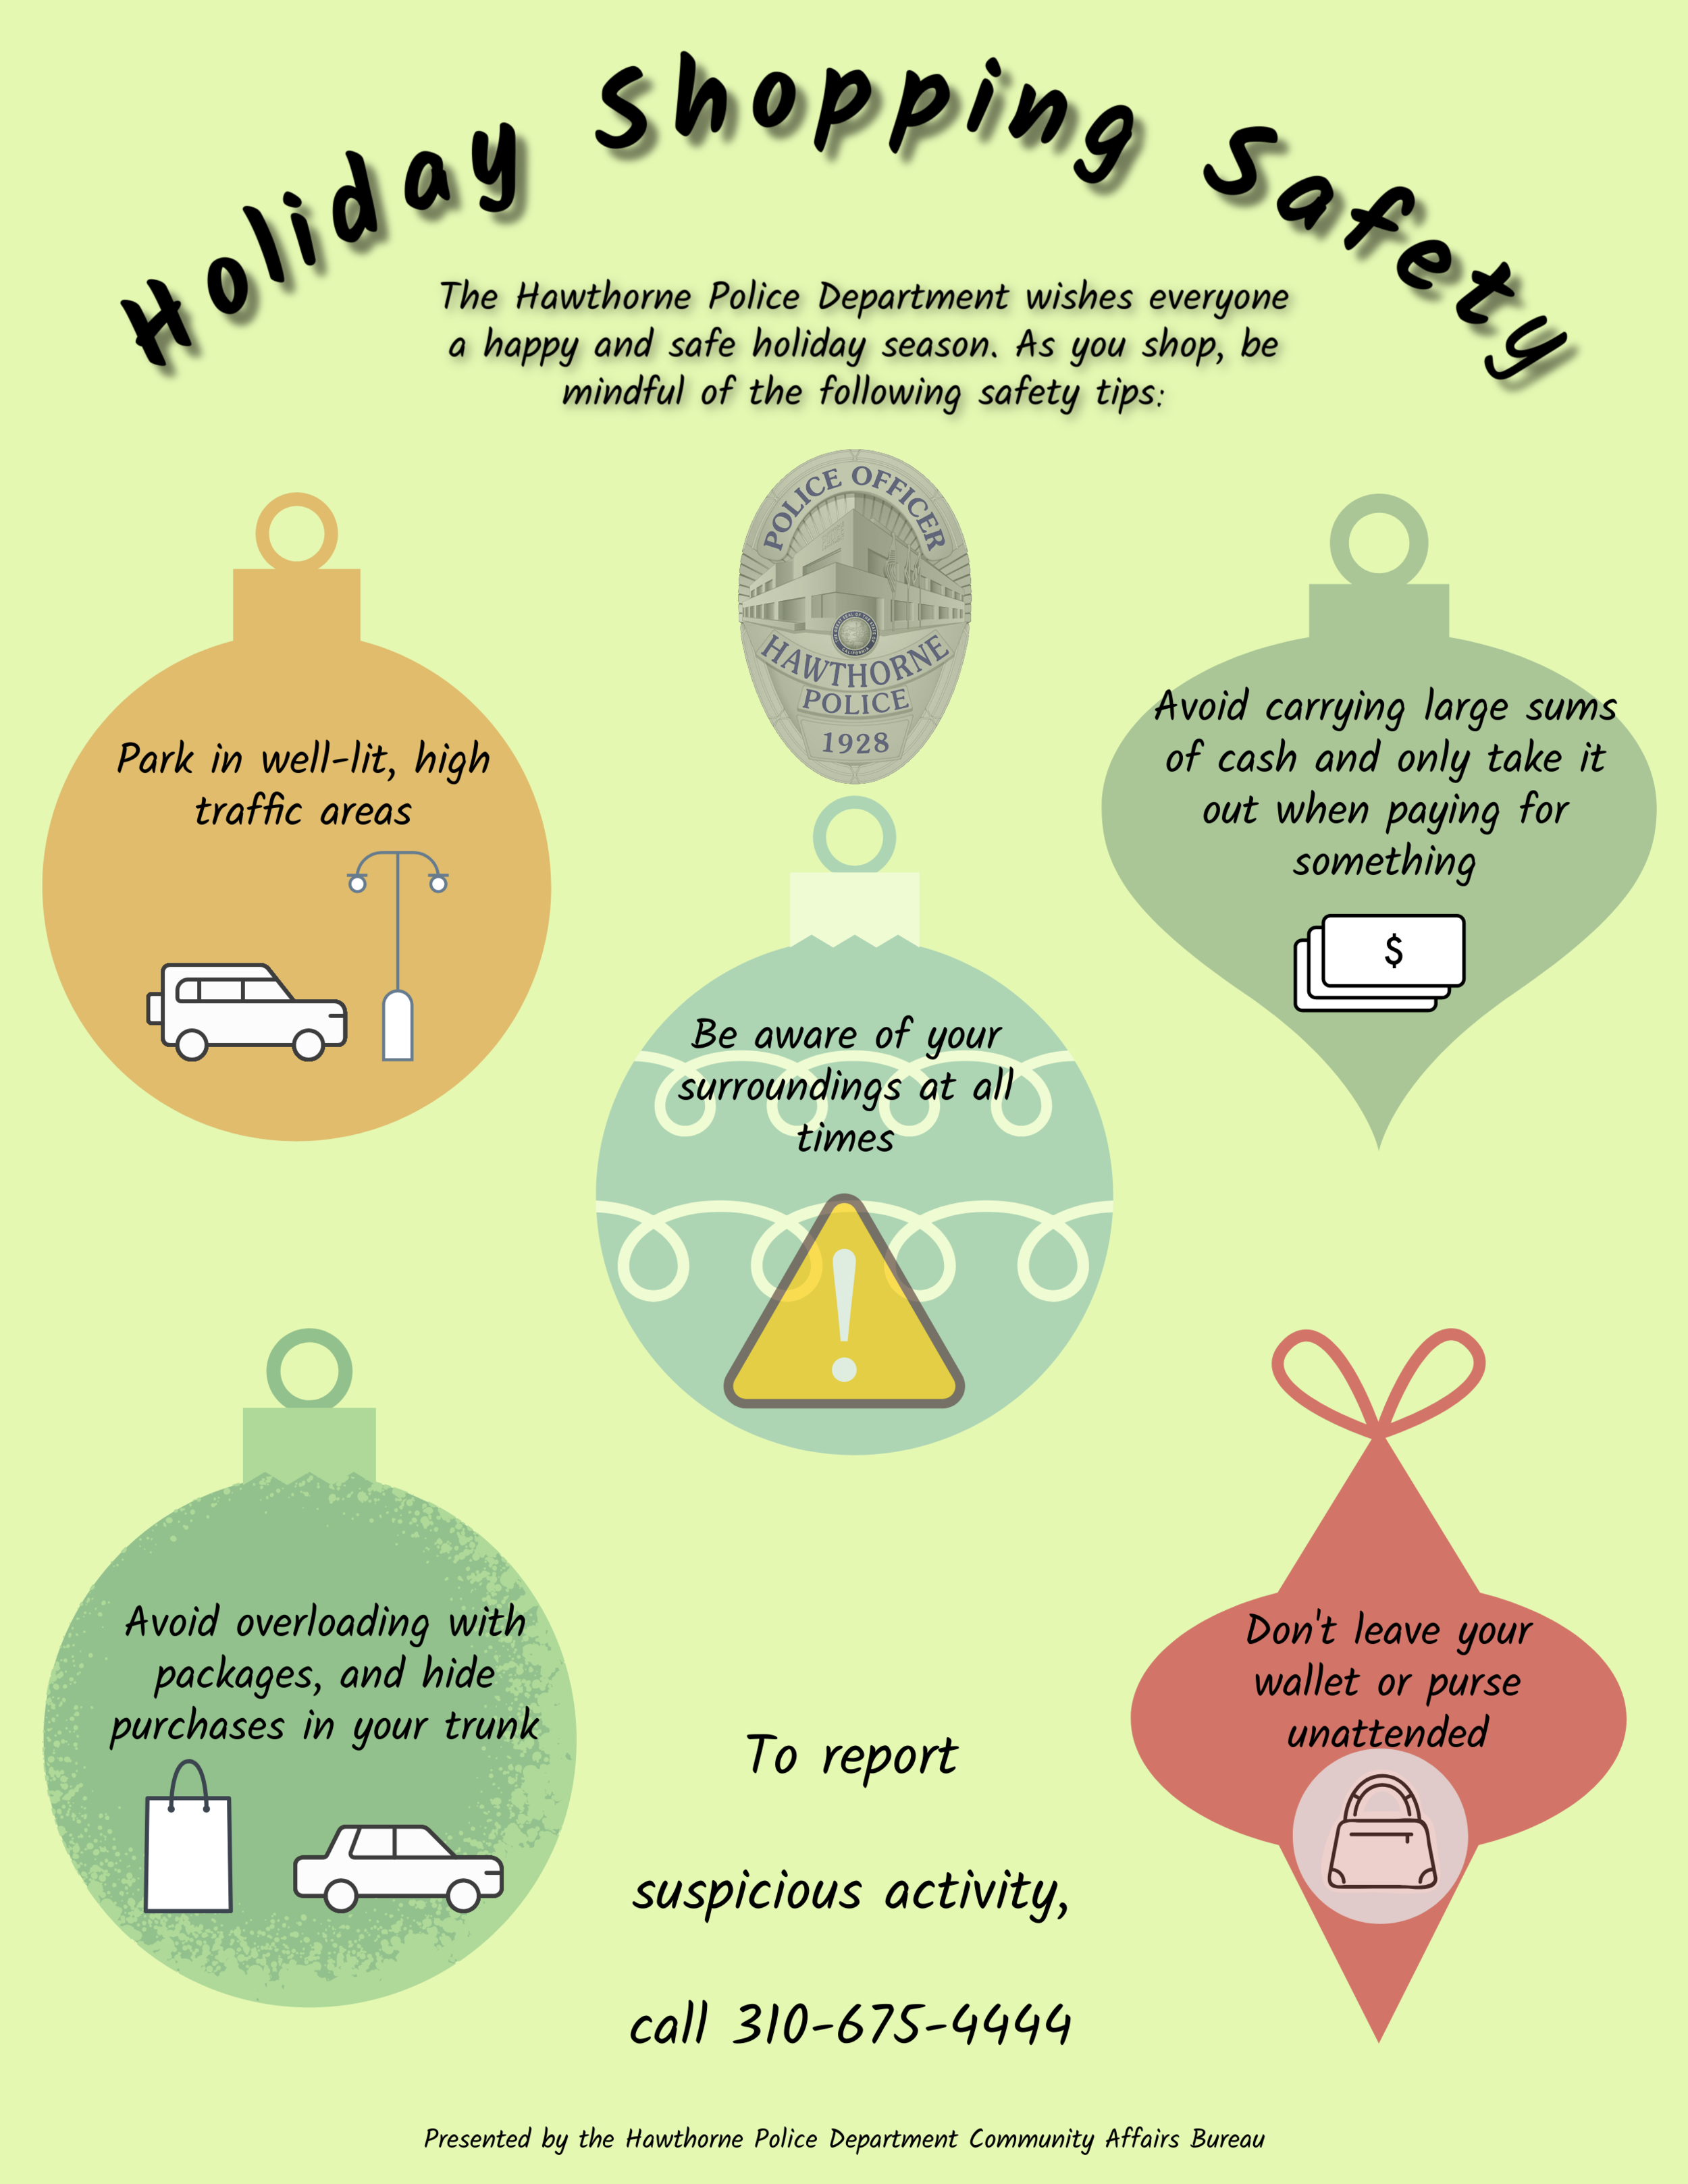 Helpful shopping safety tips to keep you protected